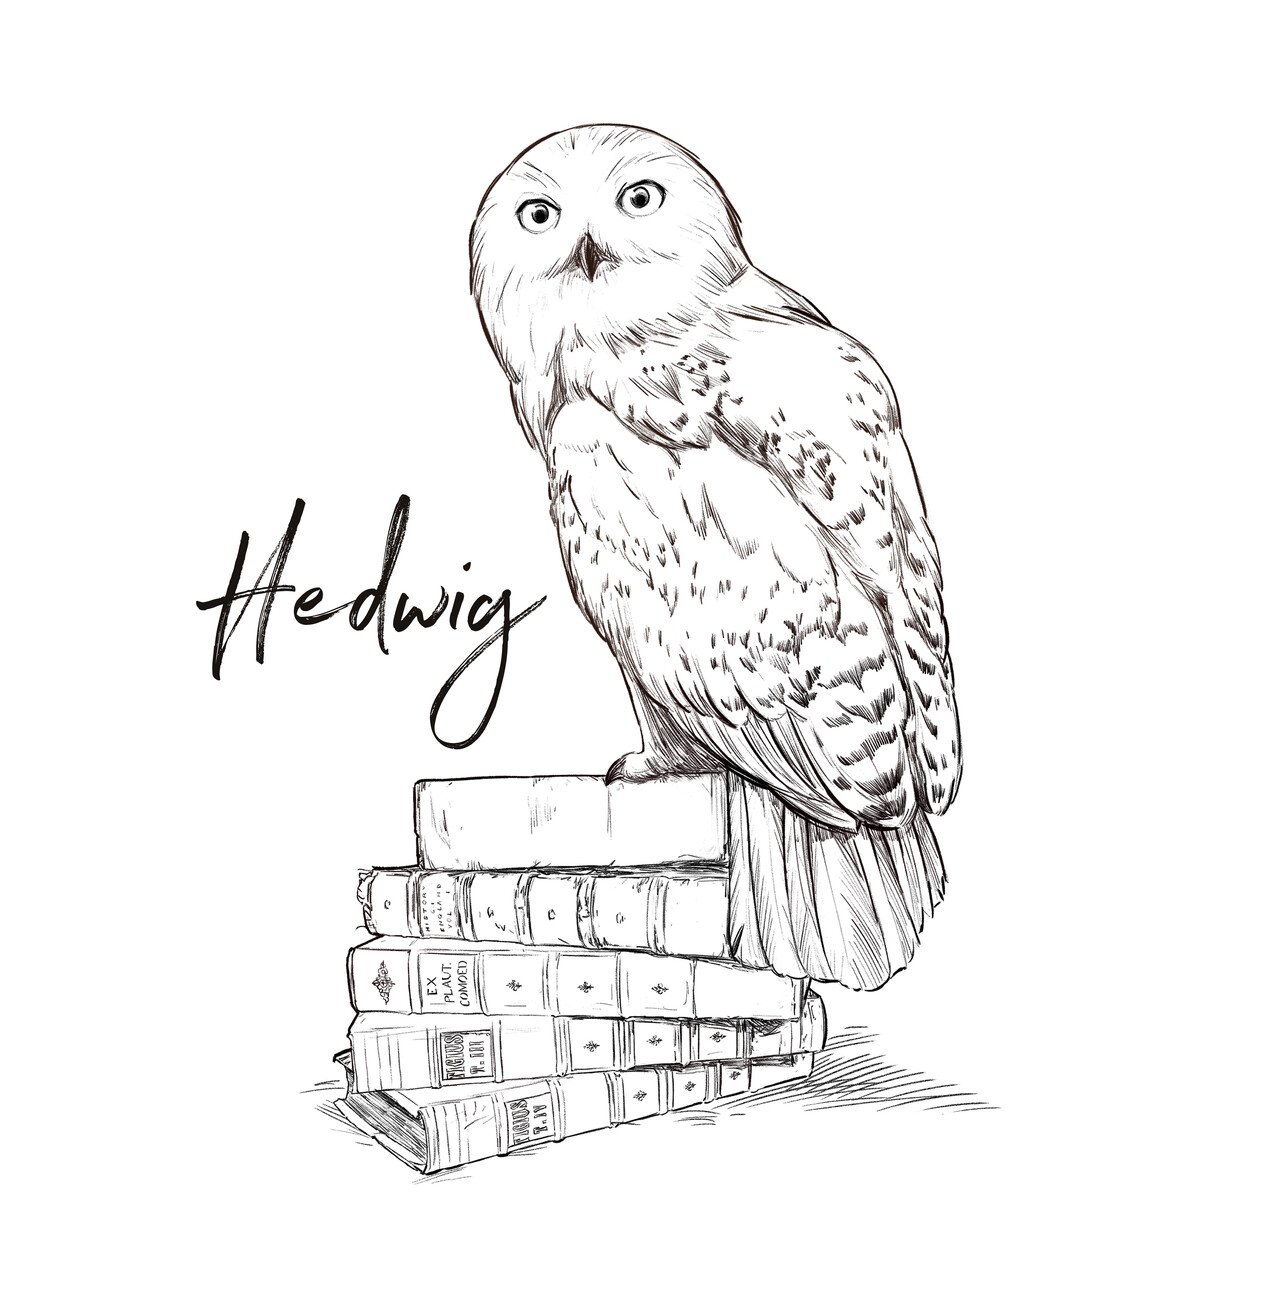 Harry Potter - Hedwig merchandise and Clothes for | accessories fans